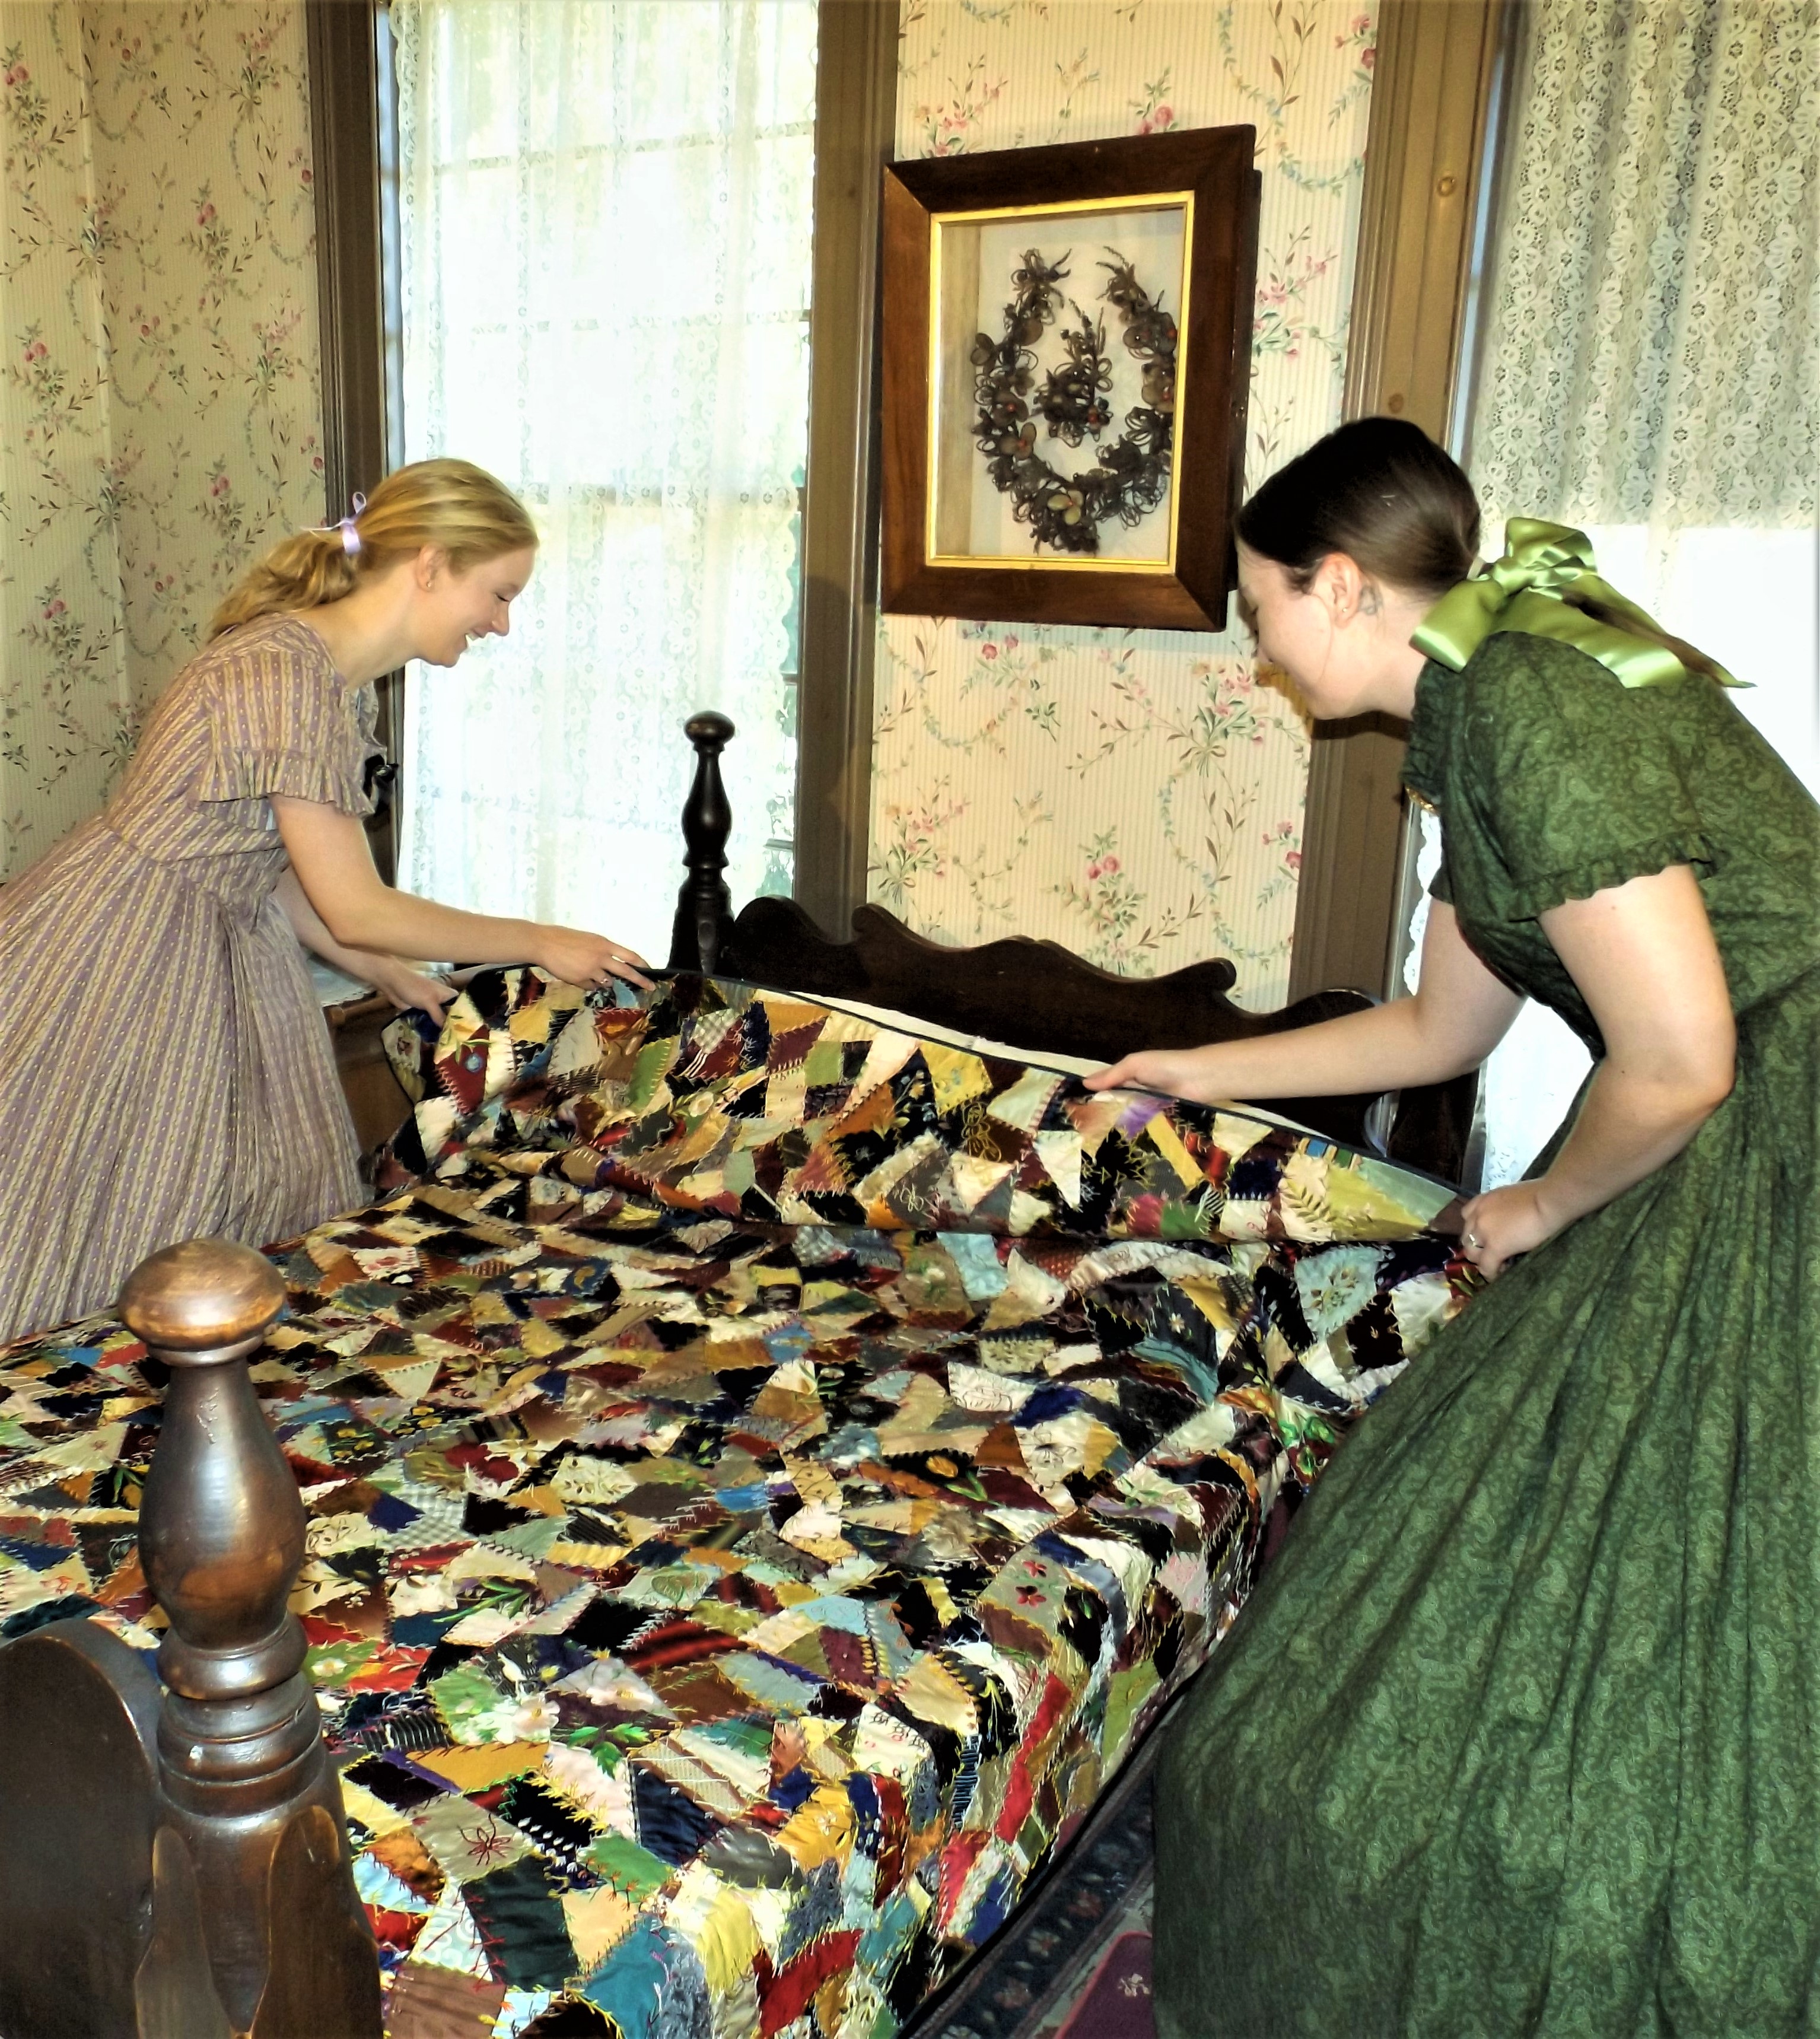 Two ladies in Victorian dresses lay an antique quilt on a bed.